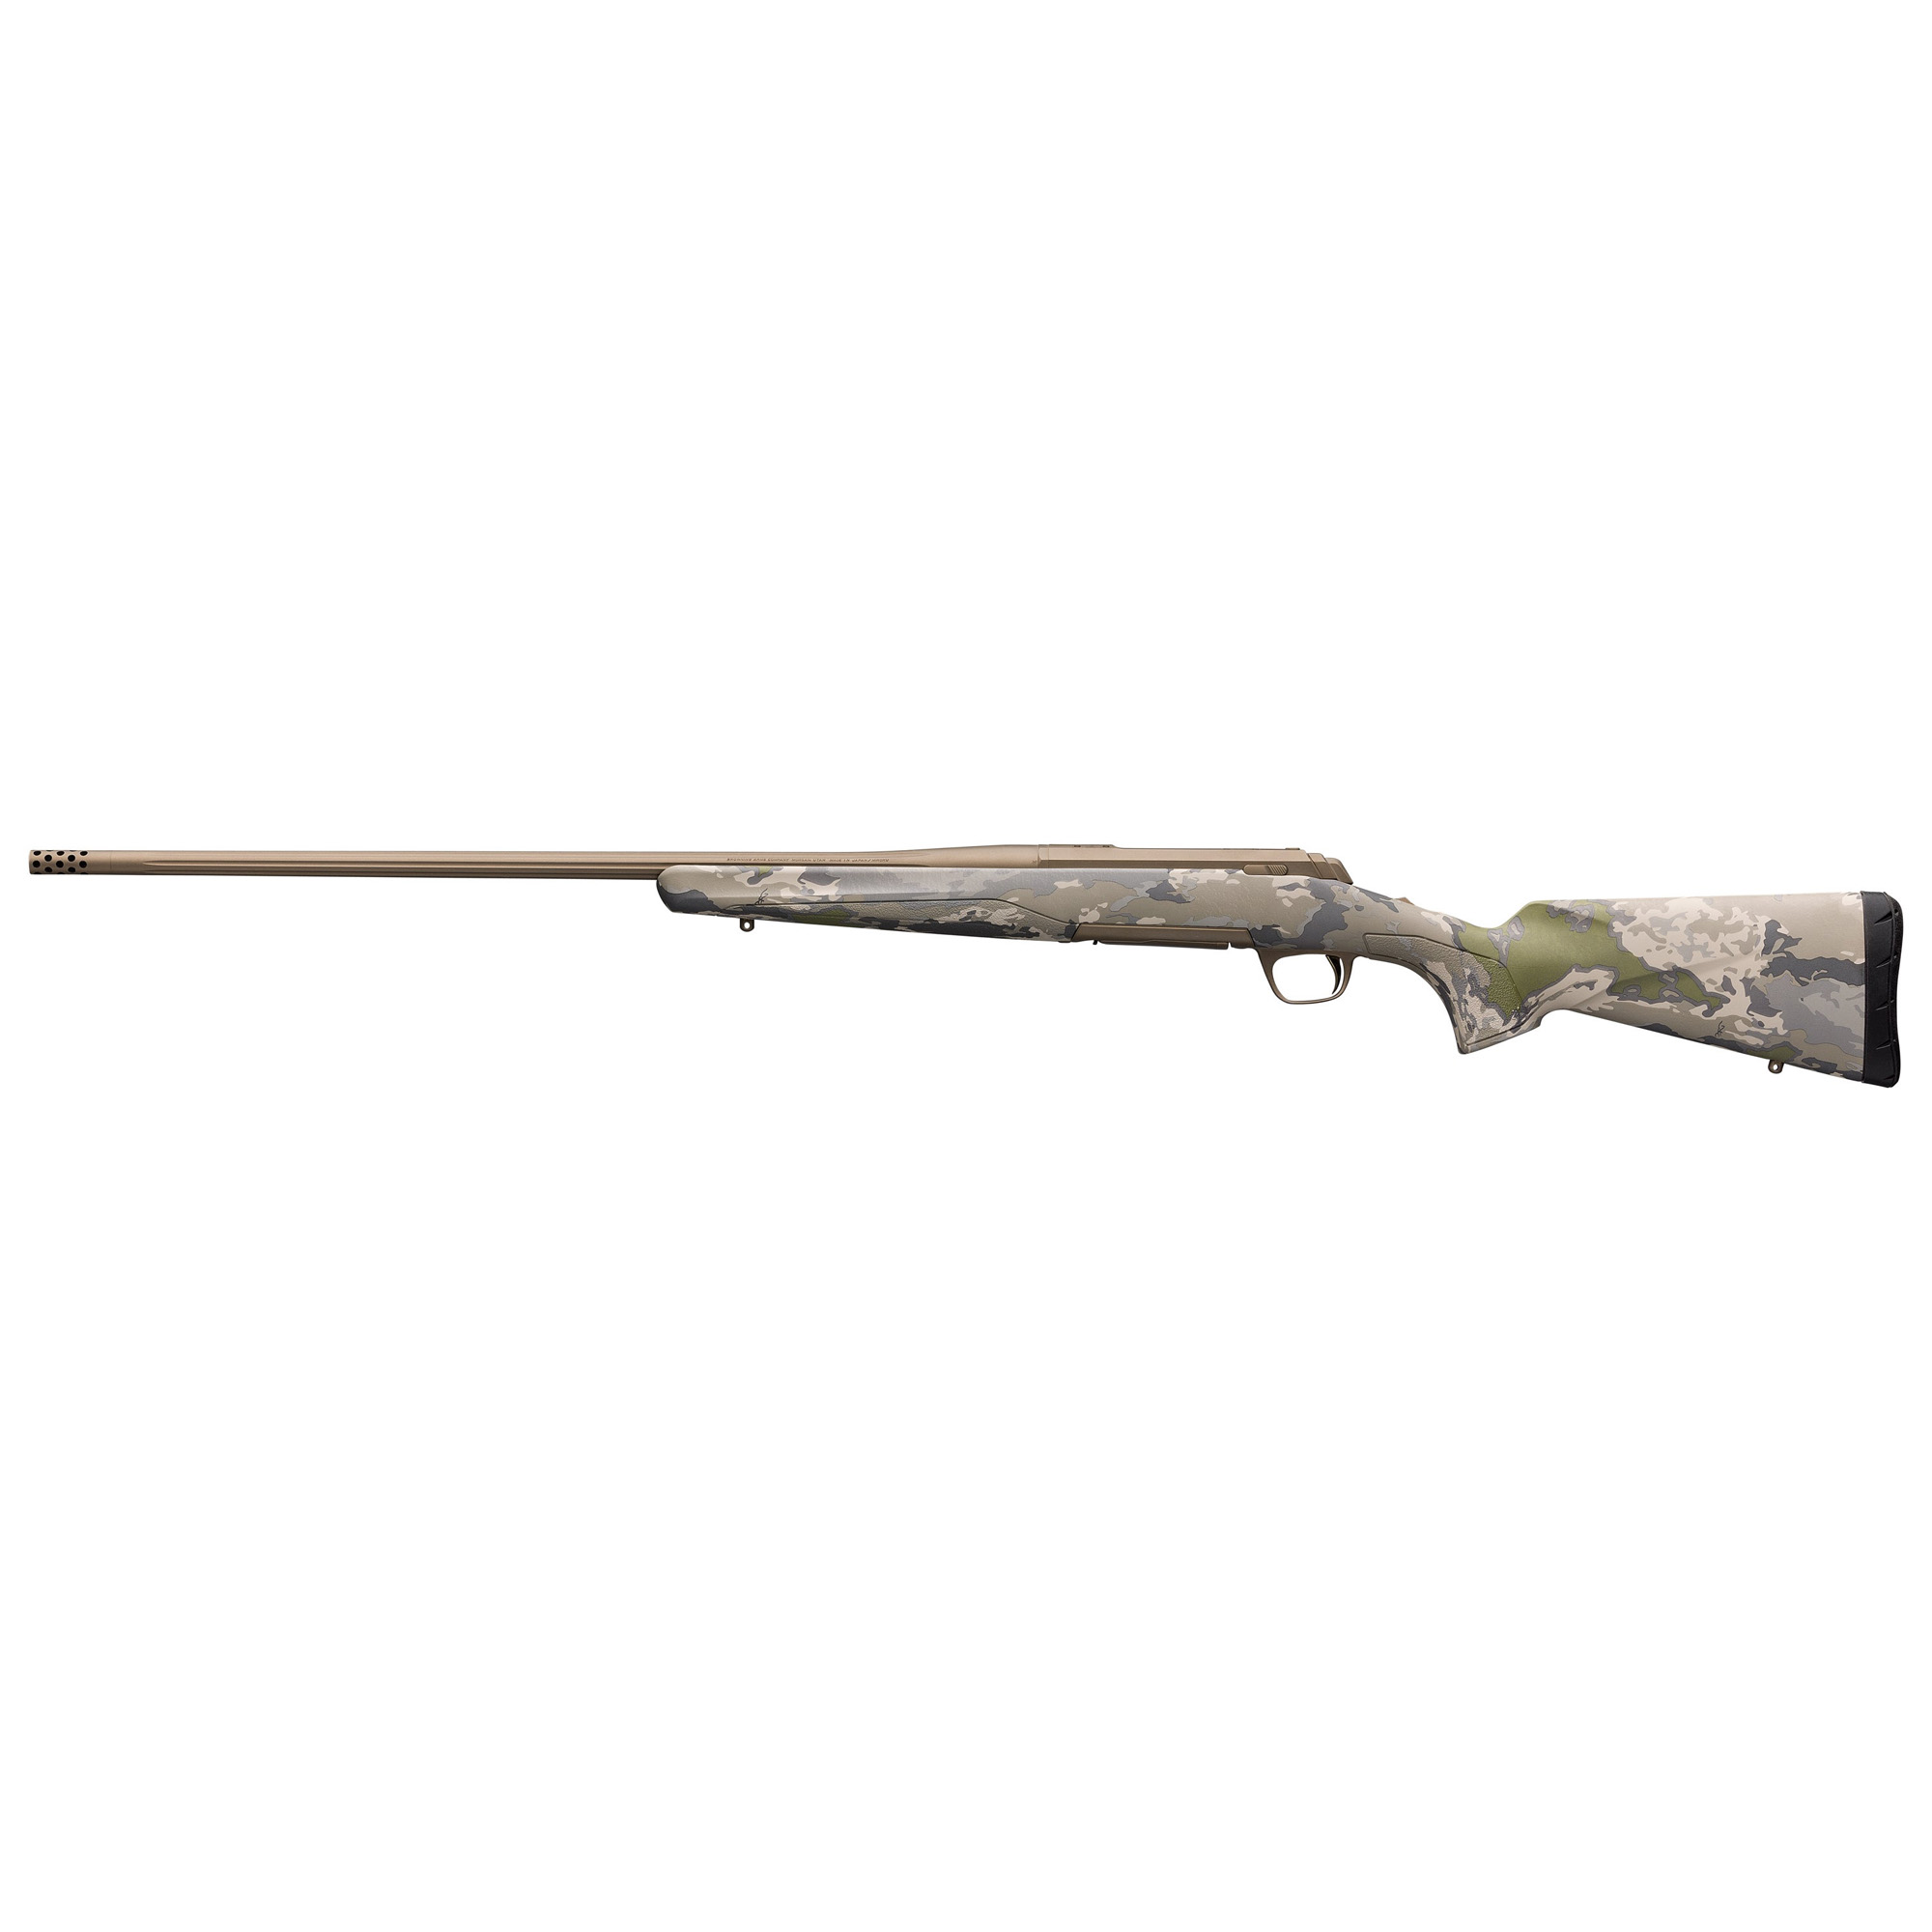 BROWNING XBLT SPEED 300WIN 26 3RD OVIX